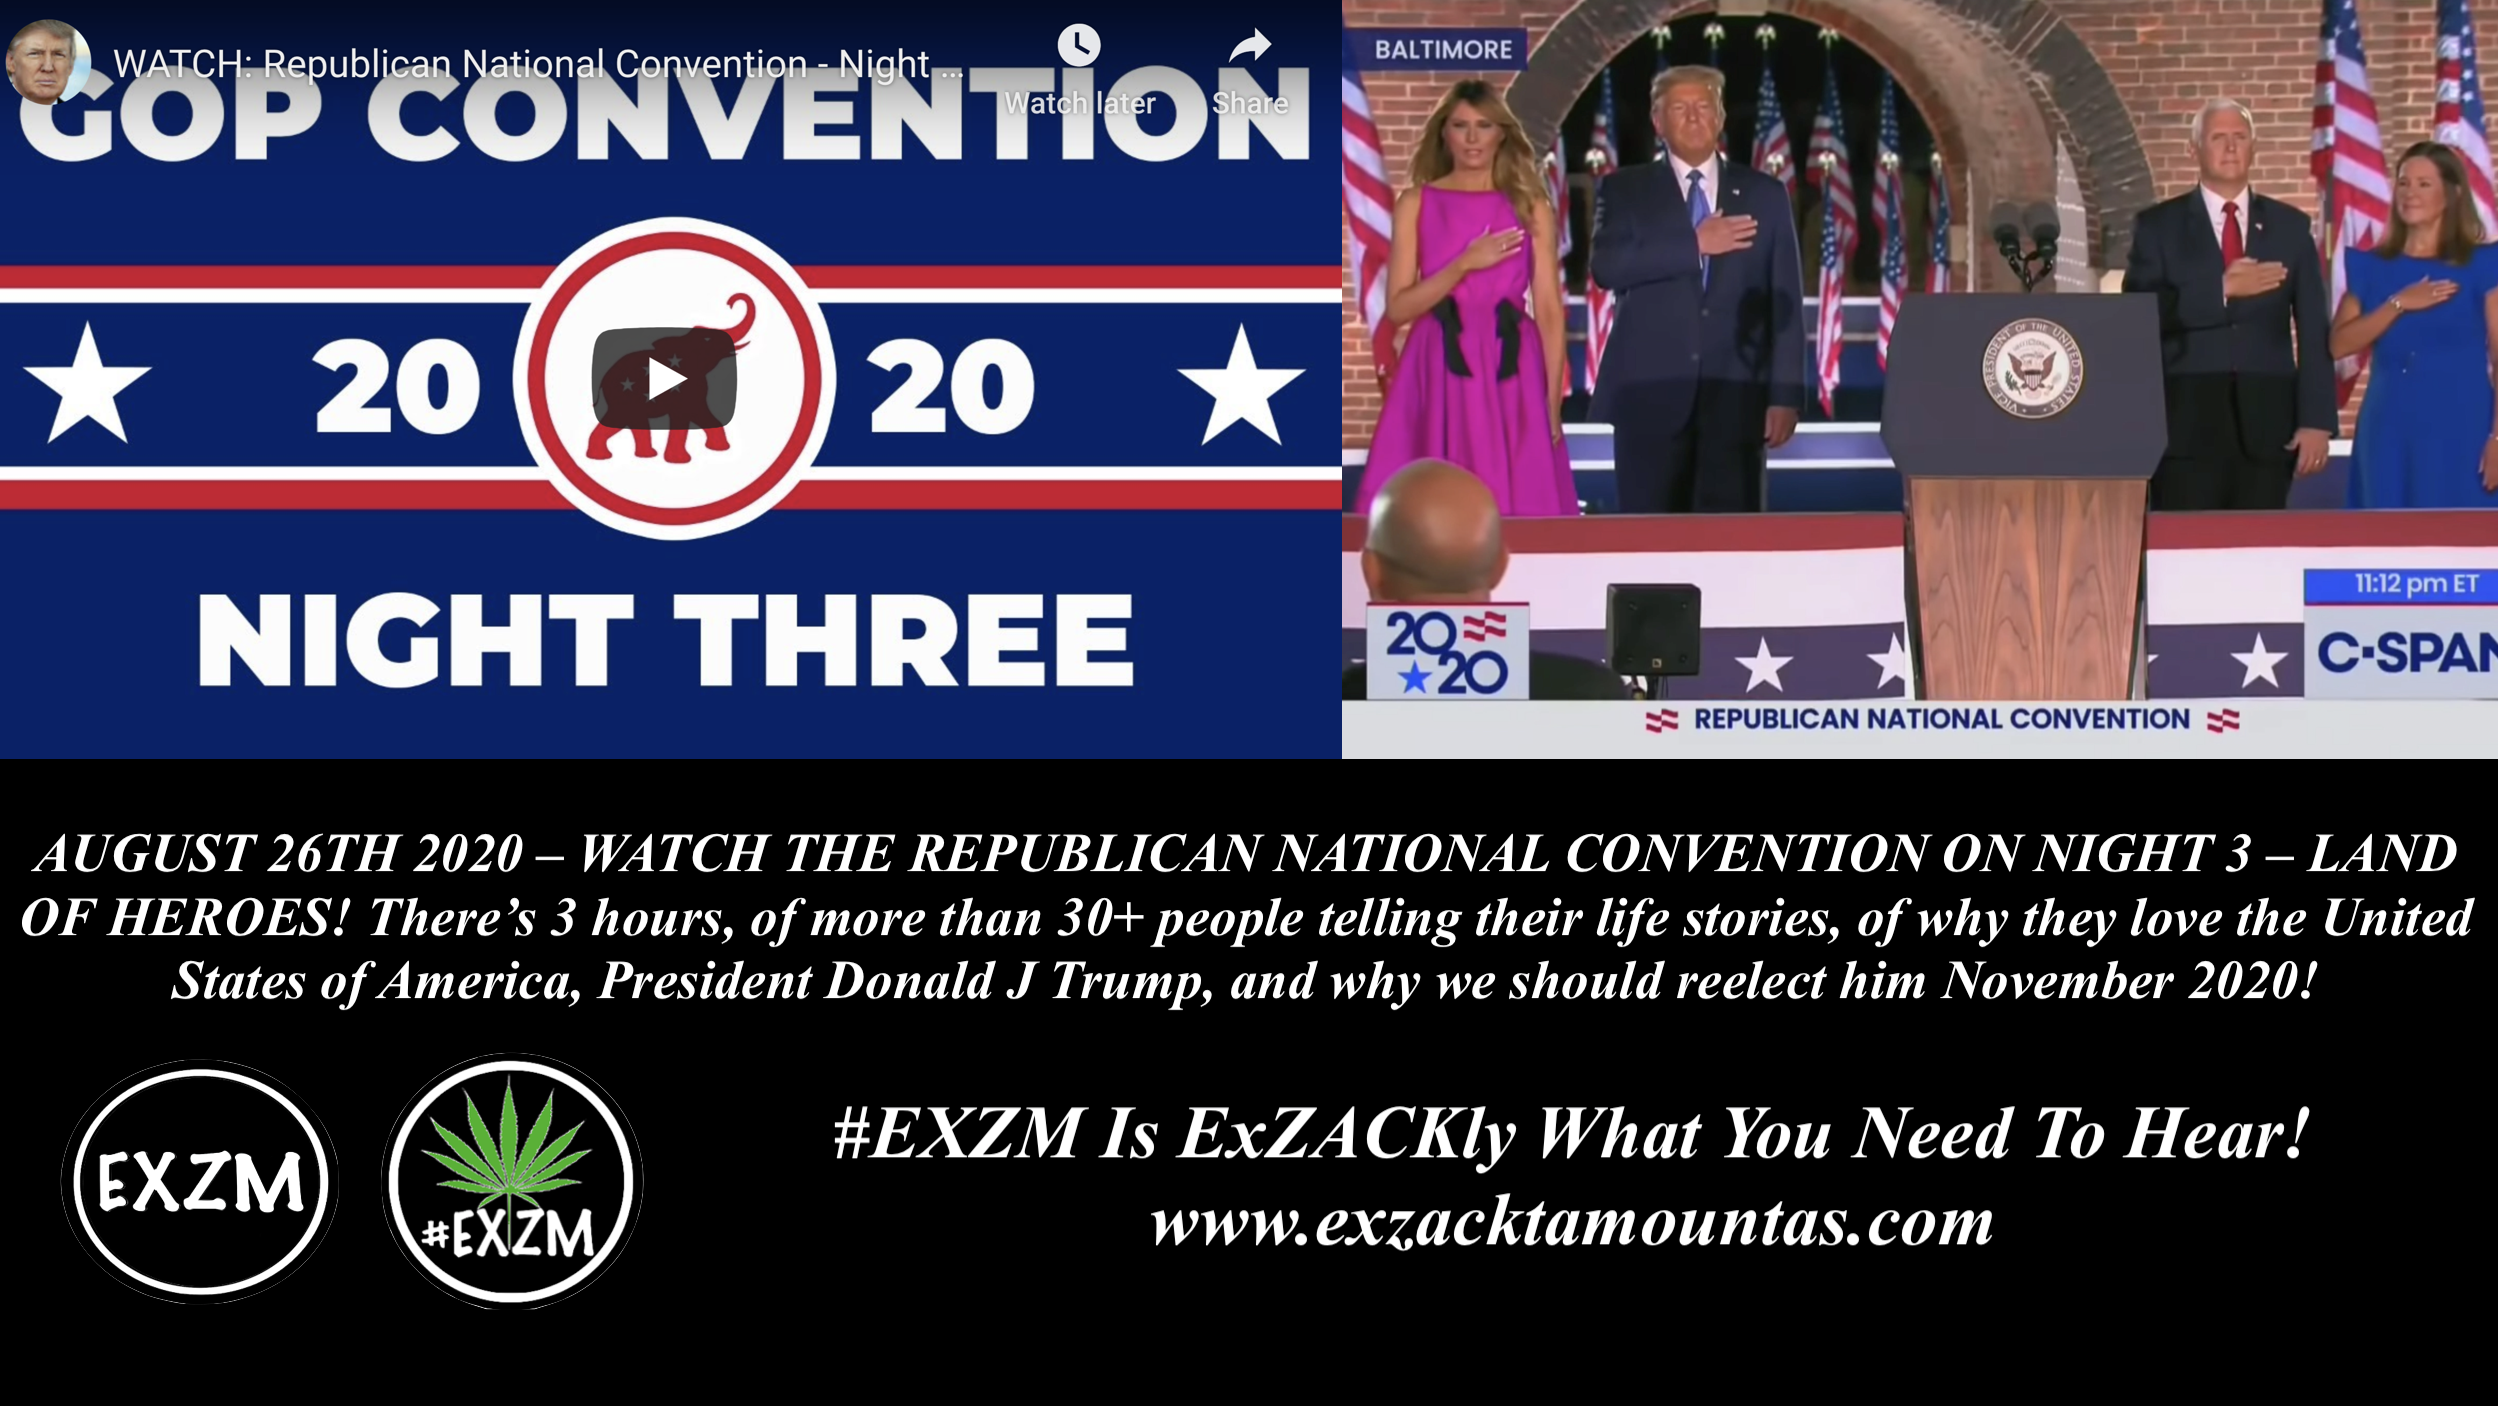 EXZM President Donald Trump RNC Republican National Convention August 26th 2020 Night 3